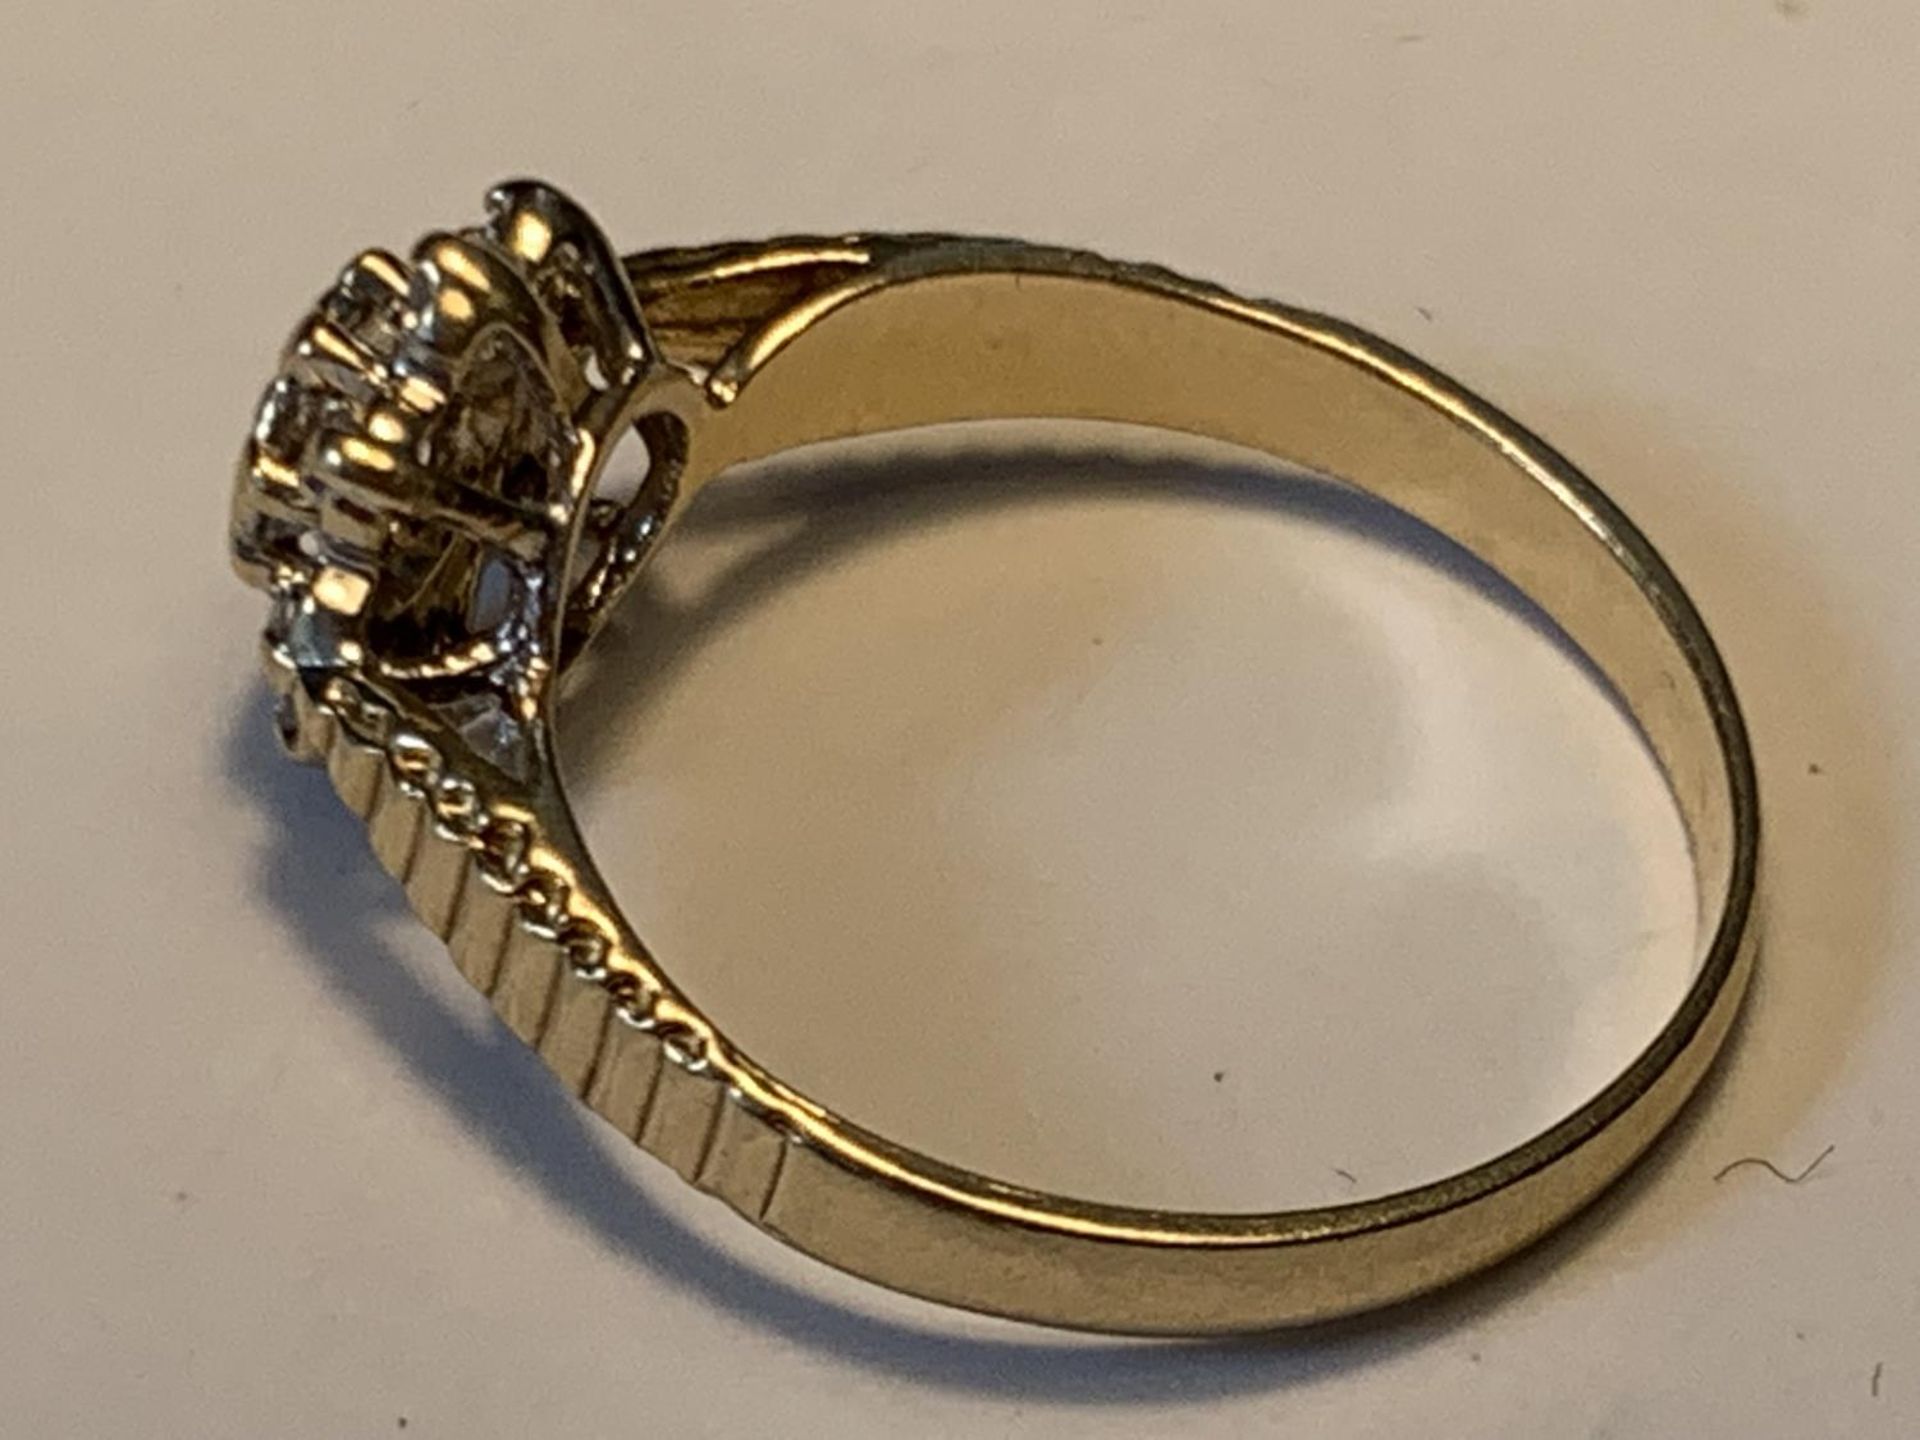 A 9 CARAT GOLD DIAMOND RING IN THE STYLE OF A DAISY SIZE K - Image 3 of 3